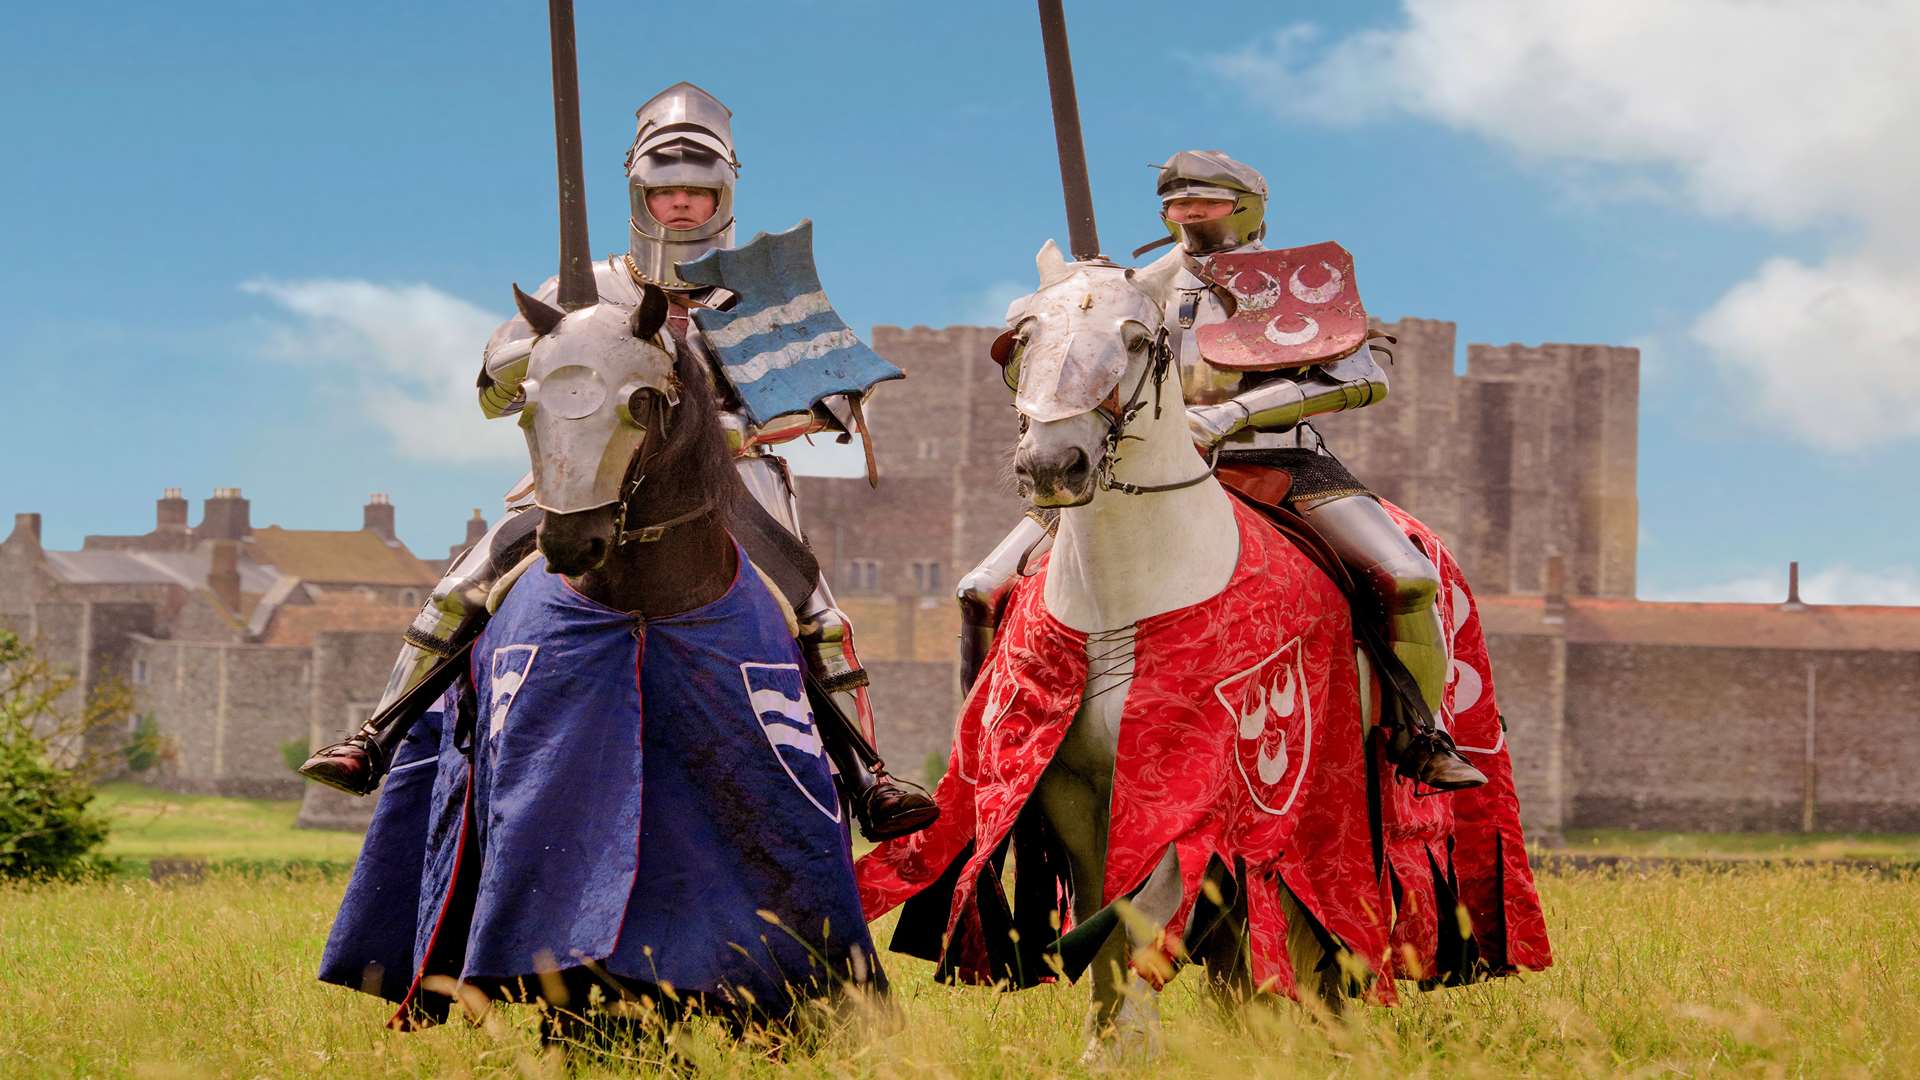 There's jousting at Dover Castle this weekend